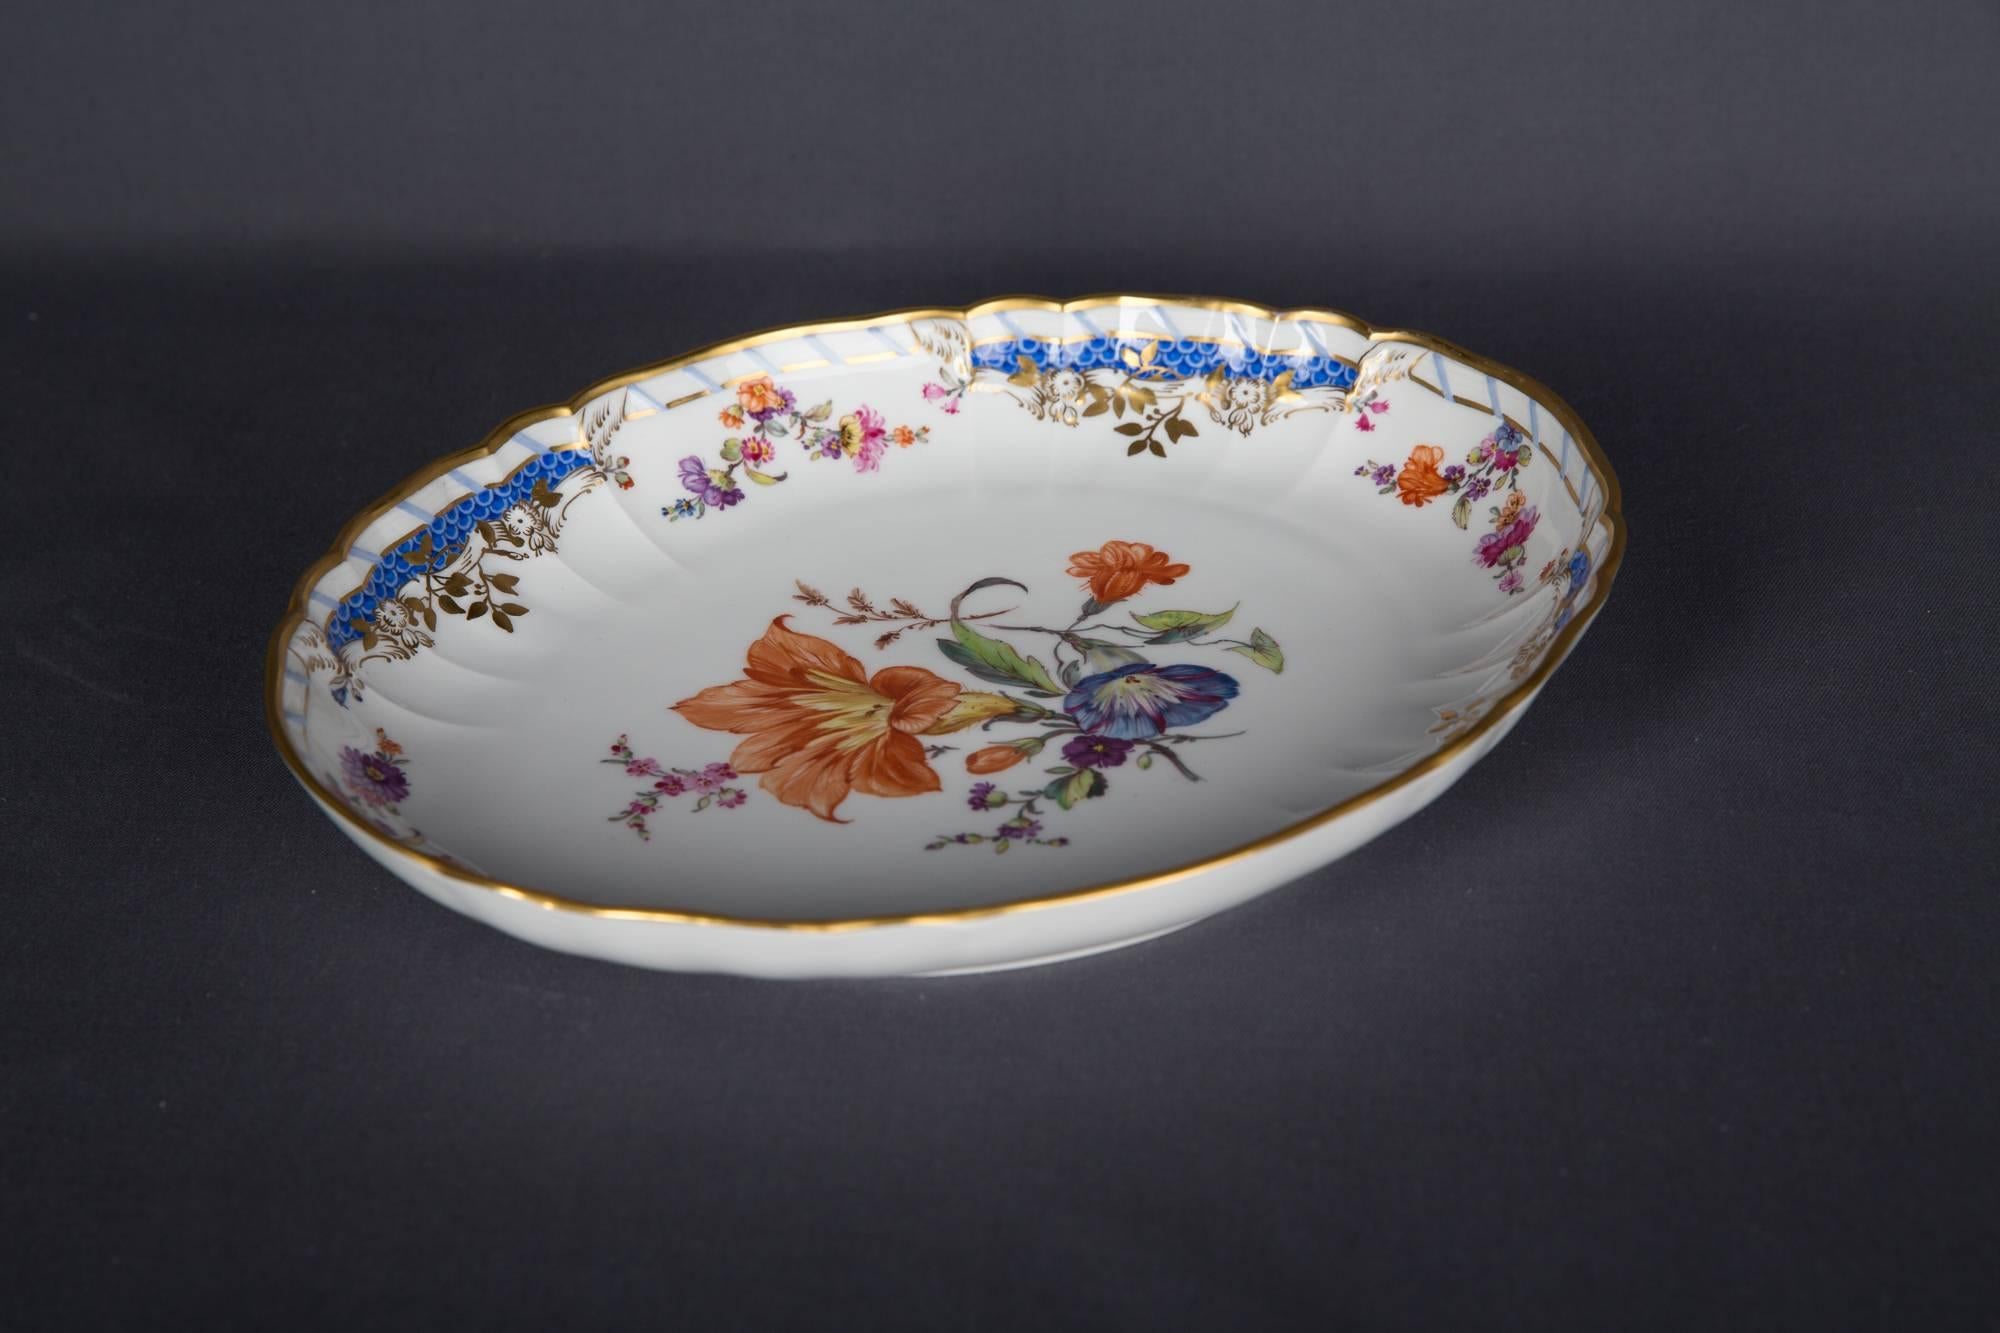 Extremely rare KPM bowl with the highest decoration of Rocaille Breslauer Stadtschloss

Very elaborate and finely painted.

Very fine finish.

KPM 1st choice with painting mark.